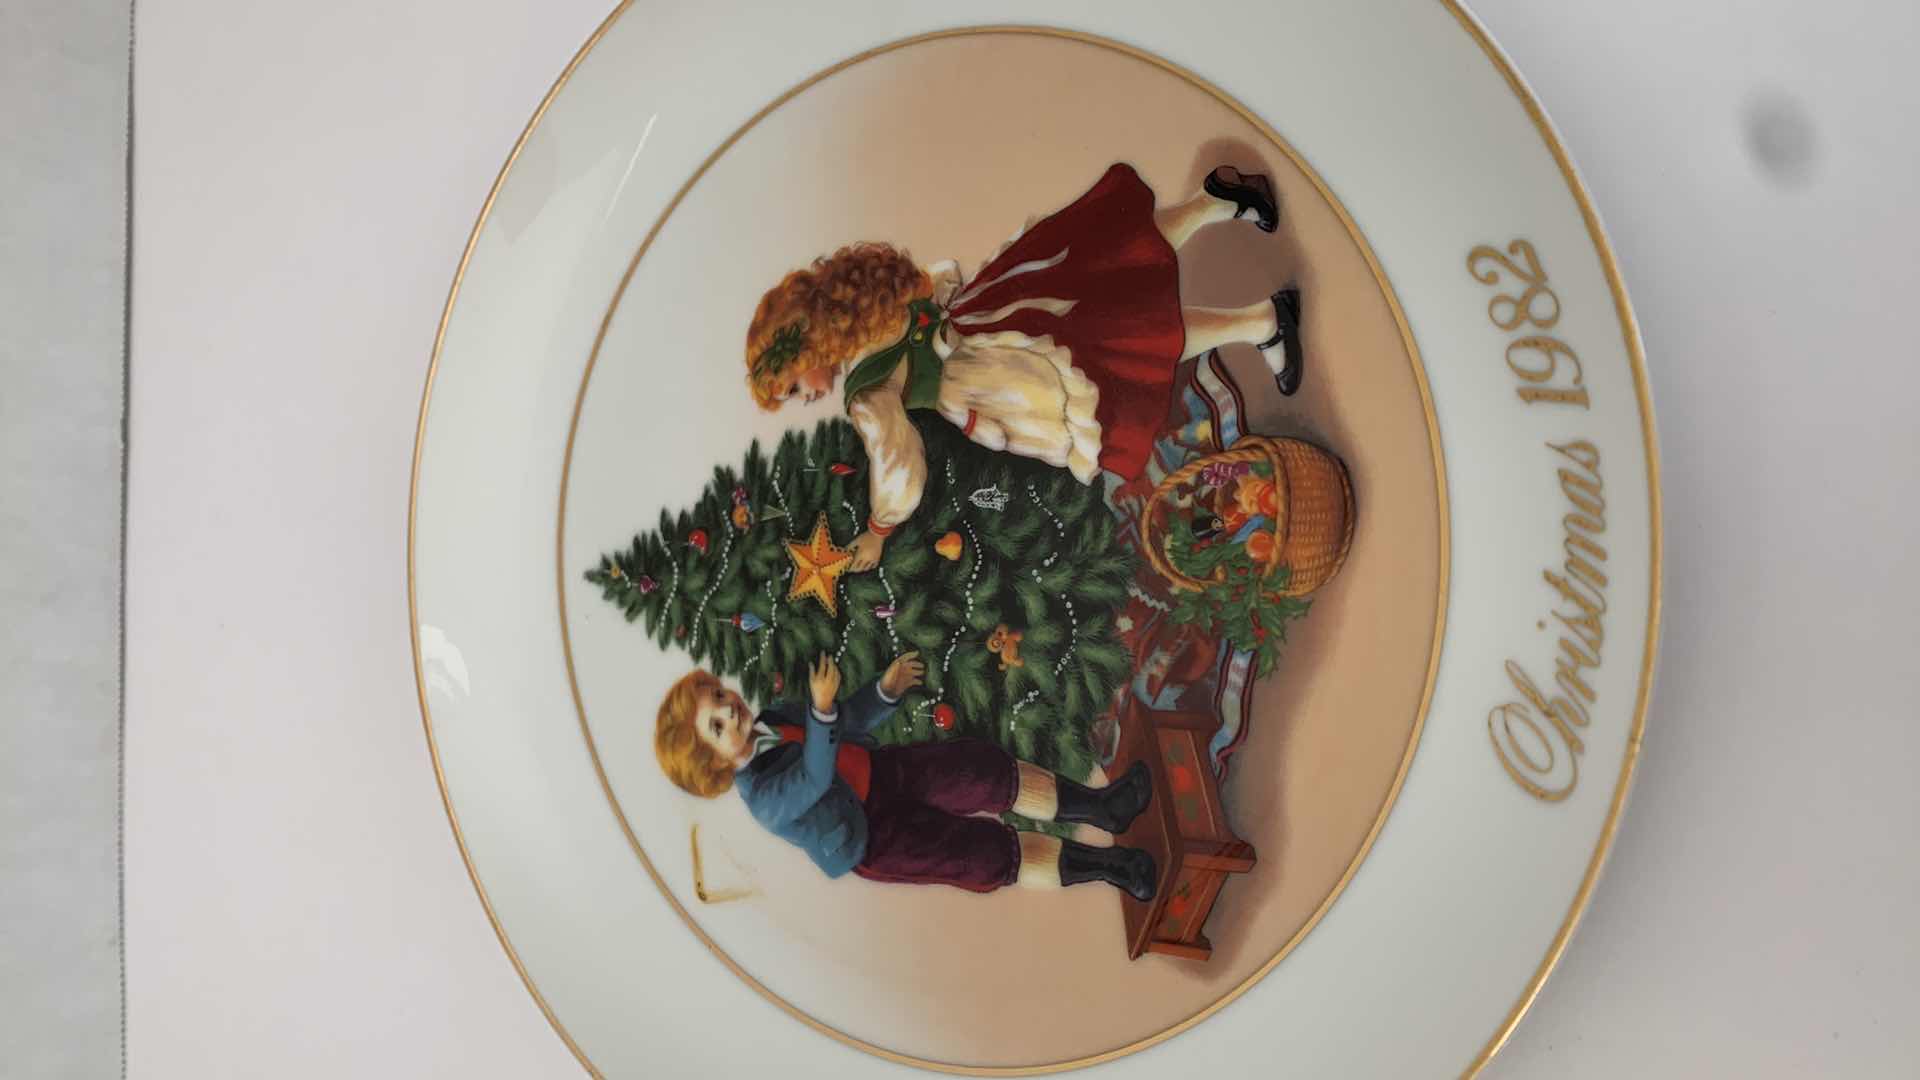 Photo 2 of AVON PRODUCTS “KEEPING THE CHRISTMAS TRADITION” PLATE 9” WIDE